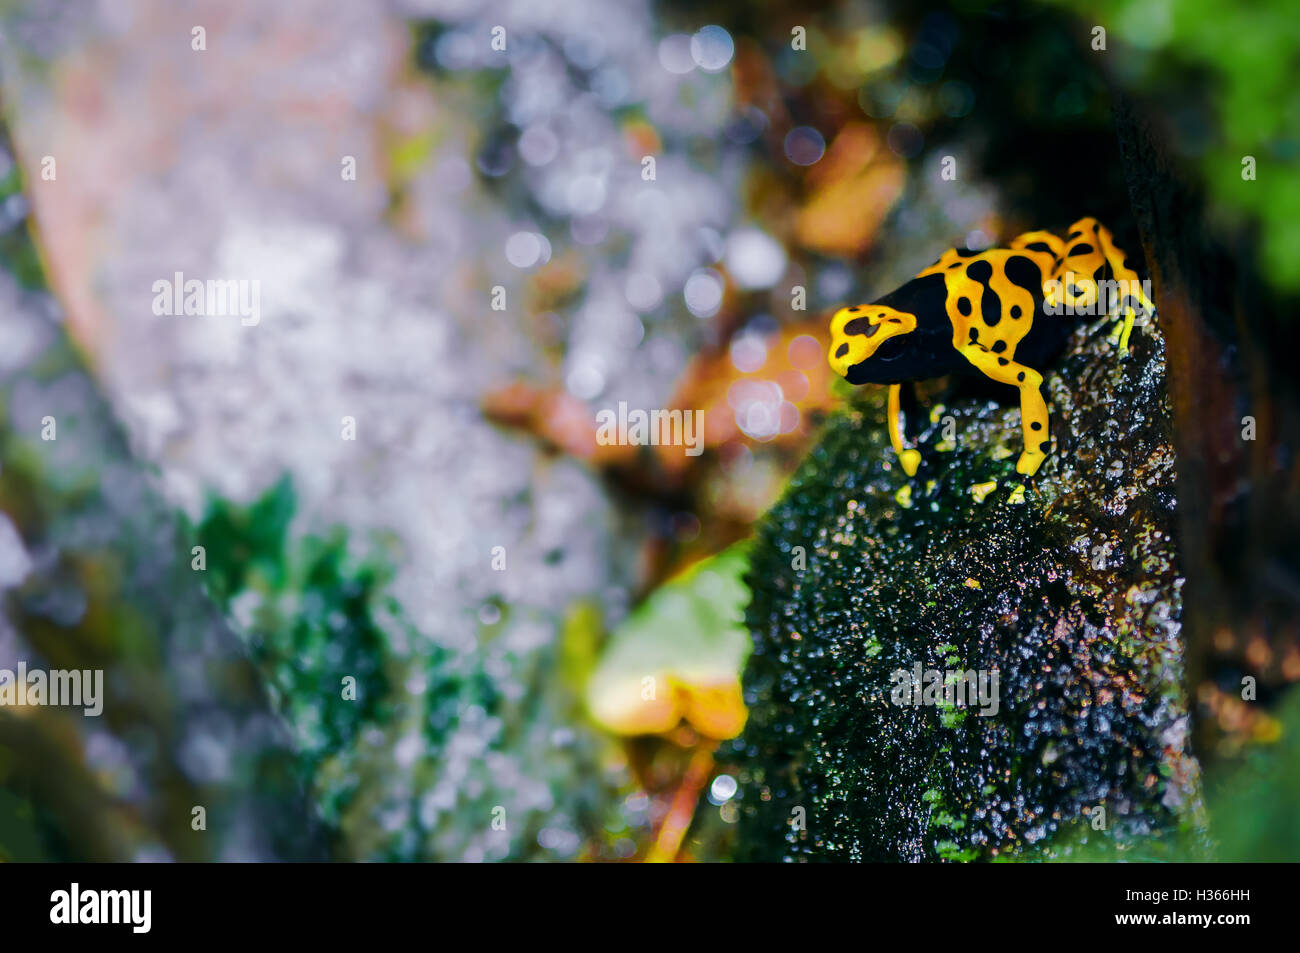 Yellow-headed poison dart frog in its natural habitat Stock Photo